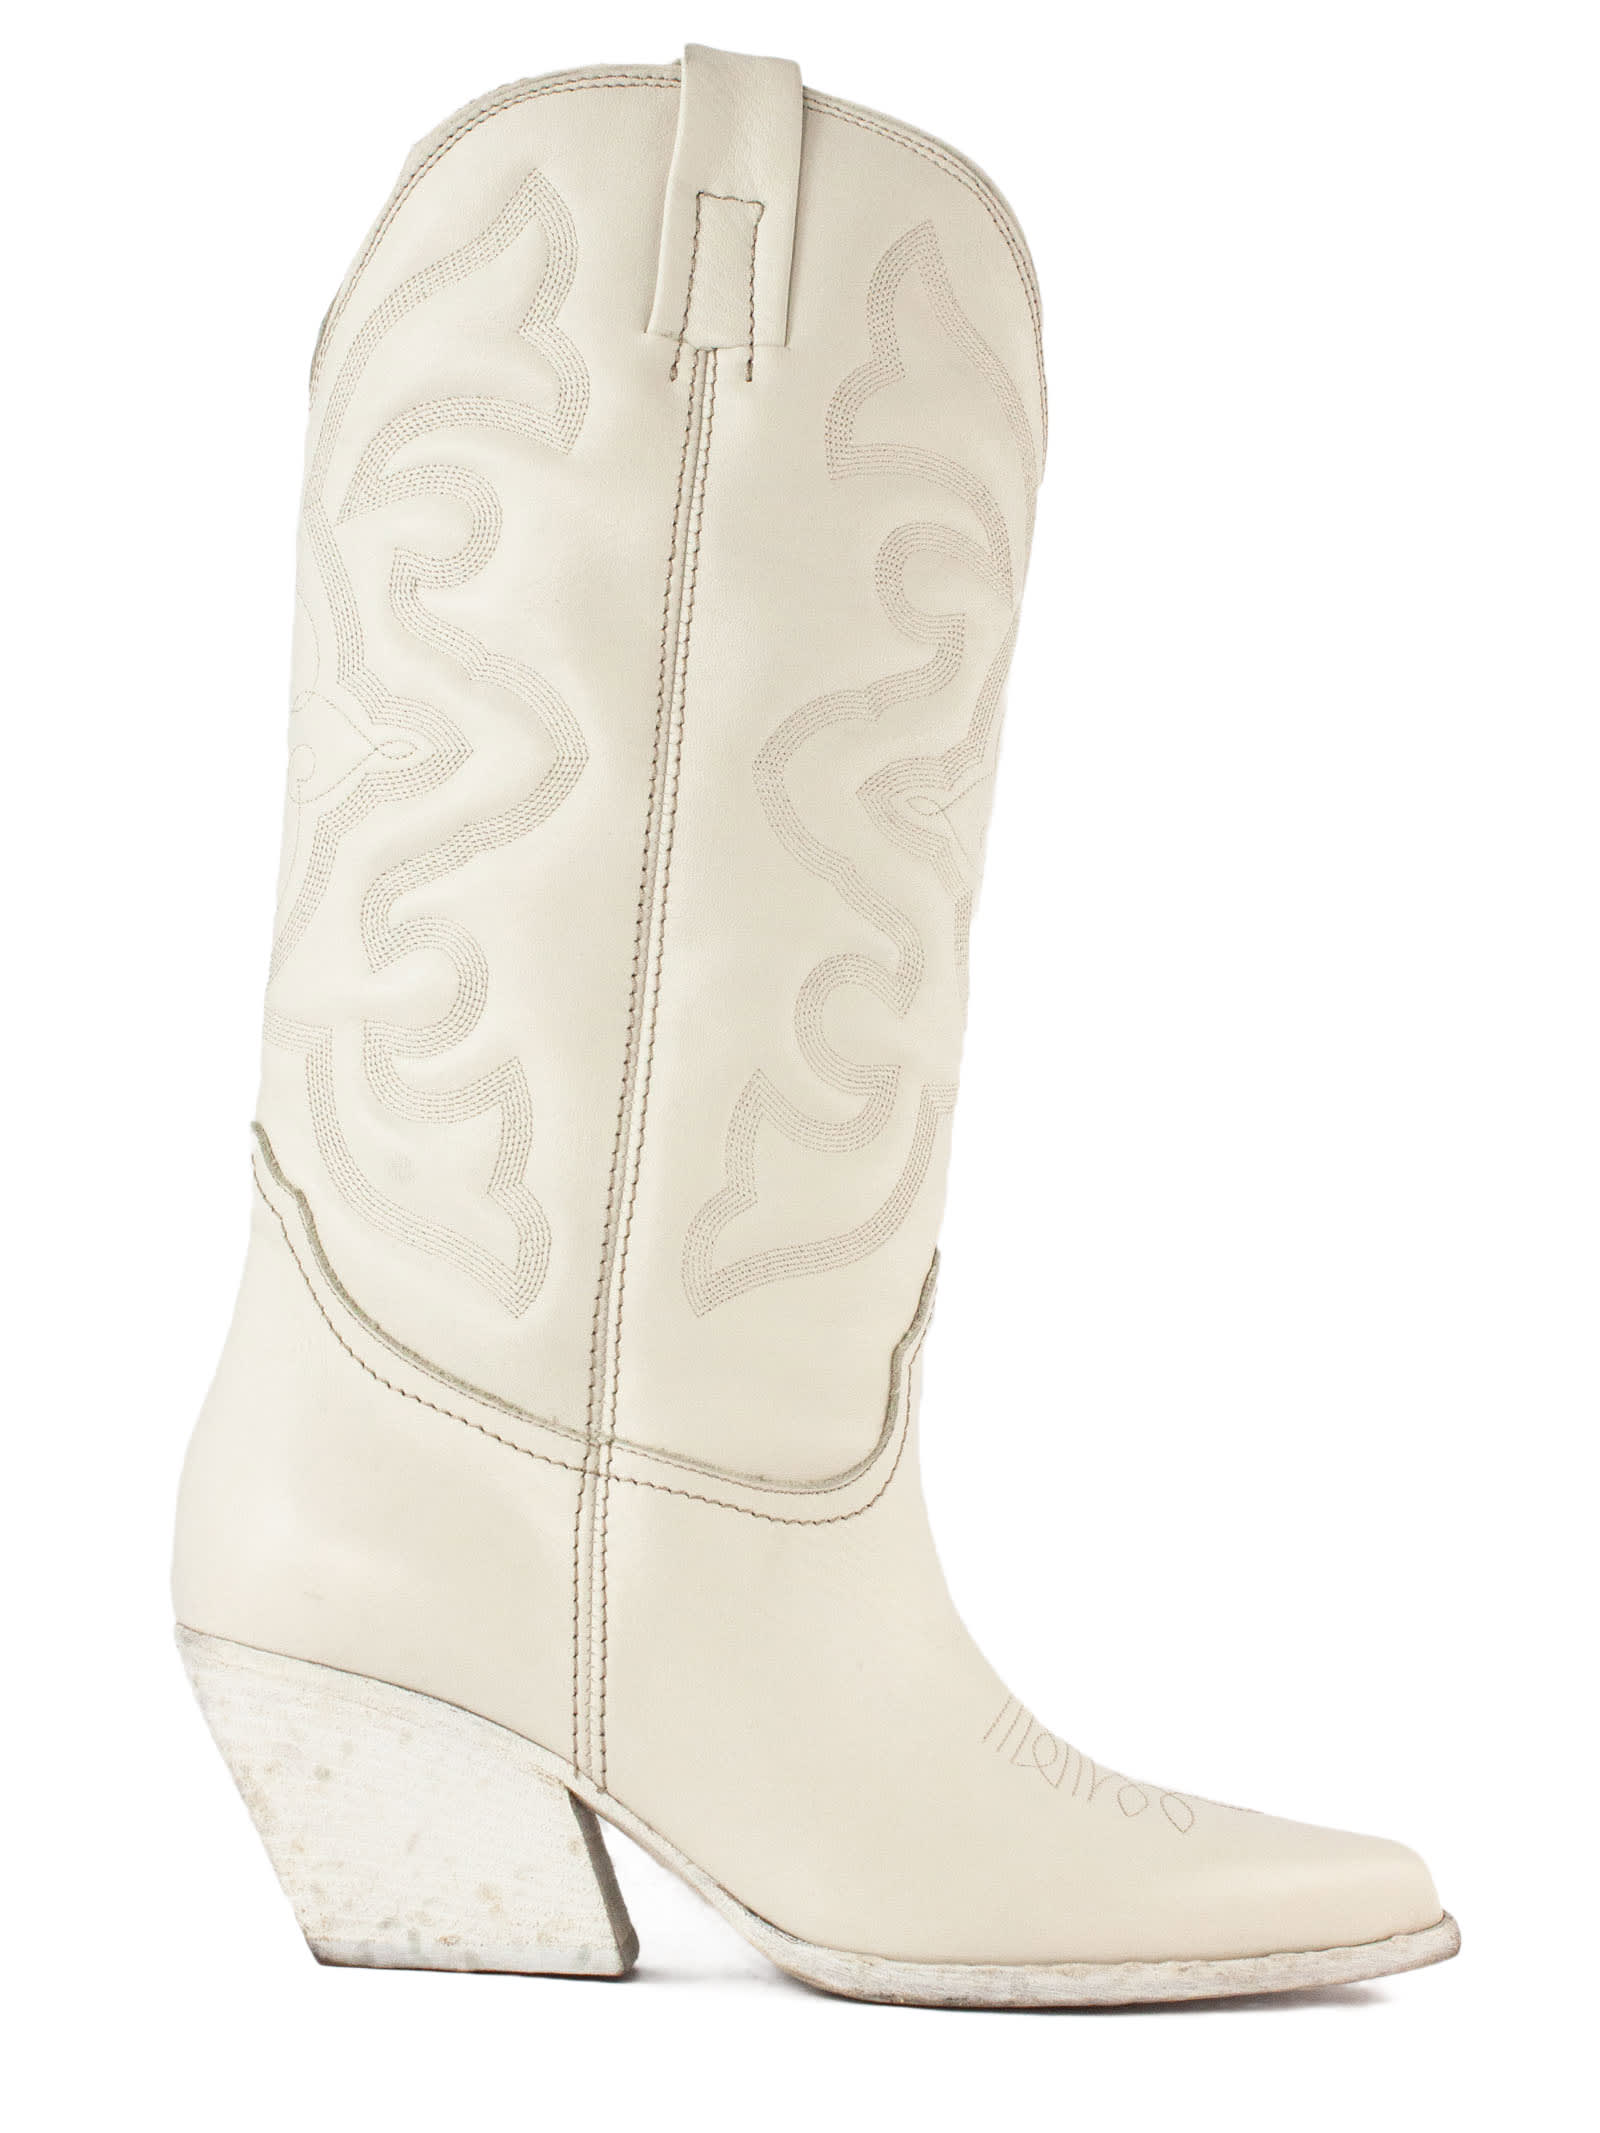 White Leather Texan Boots